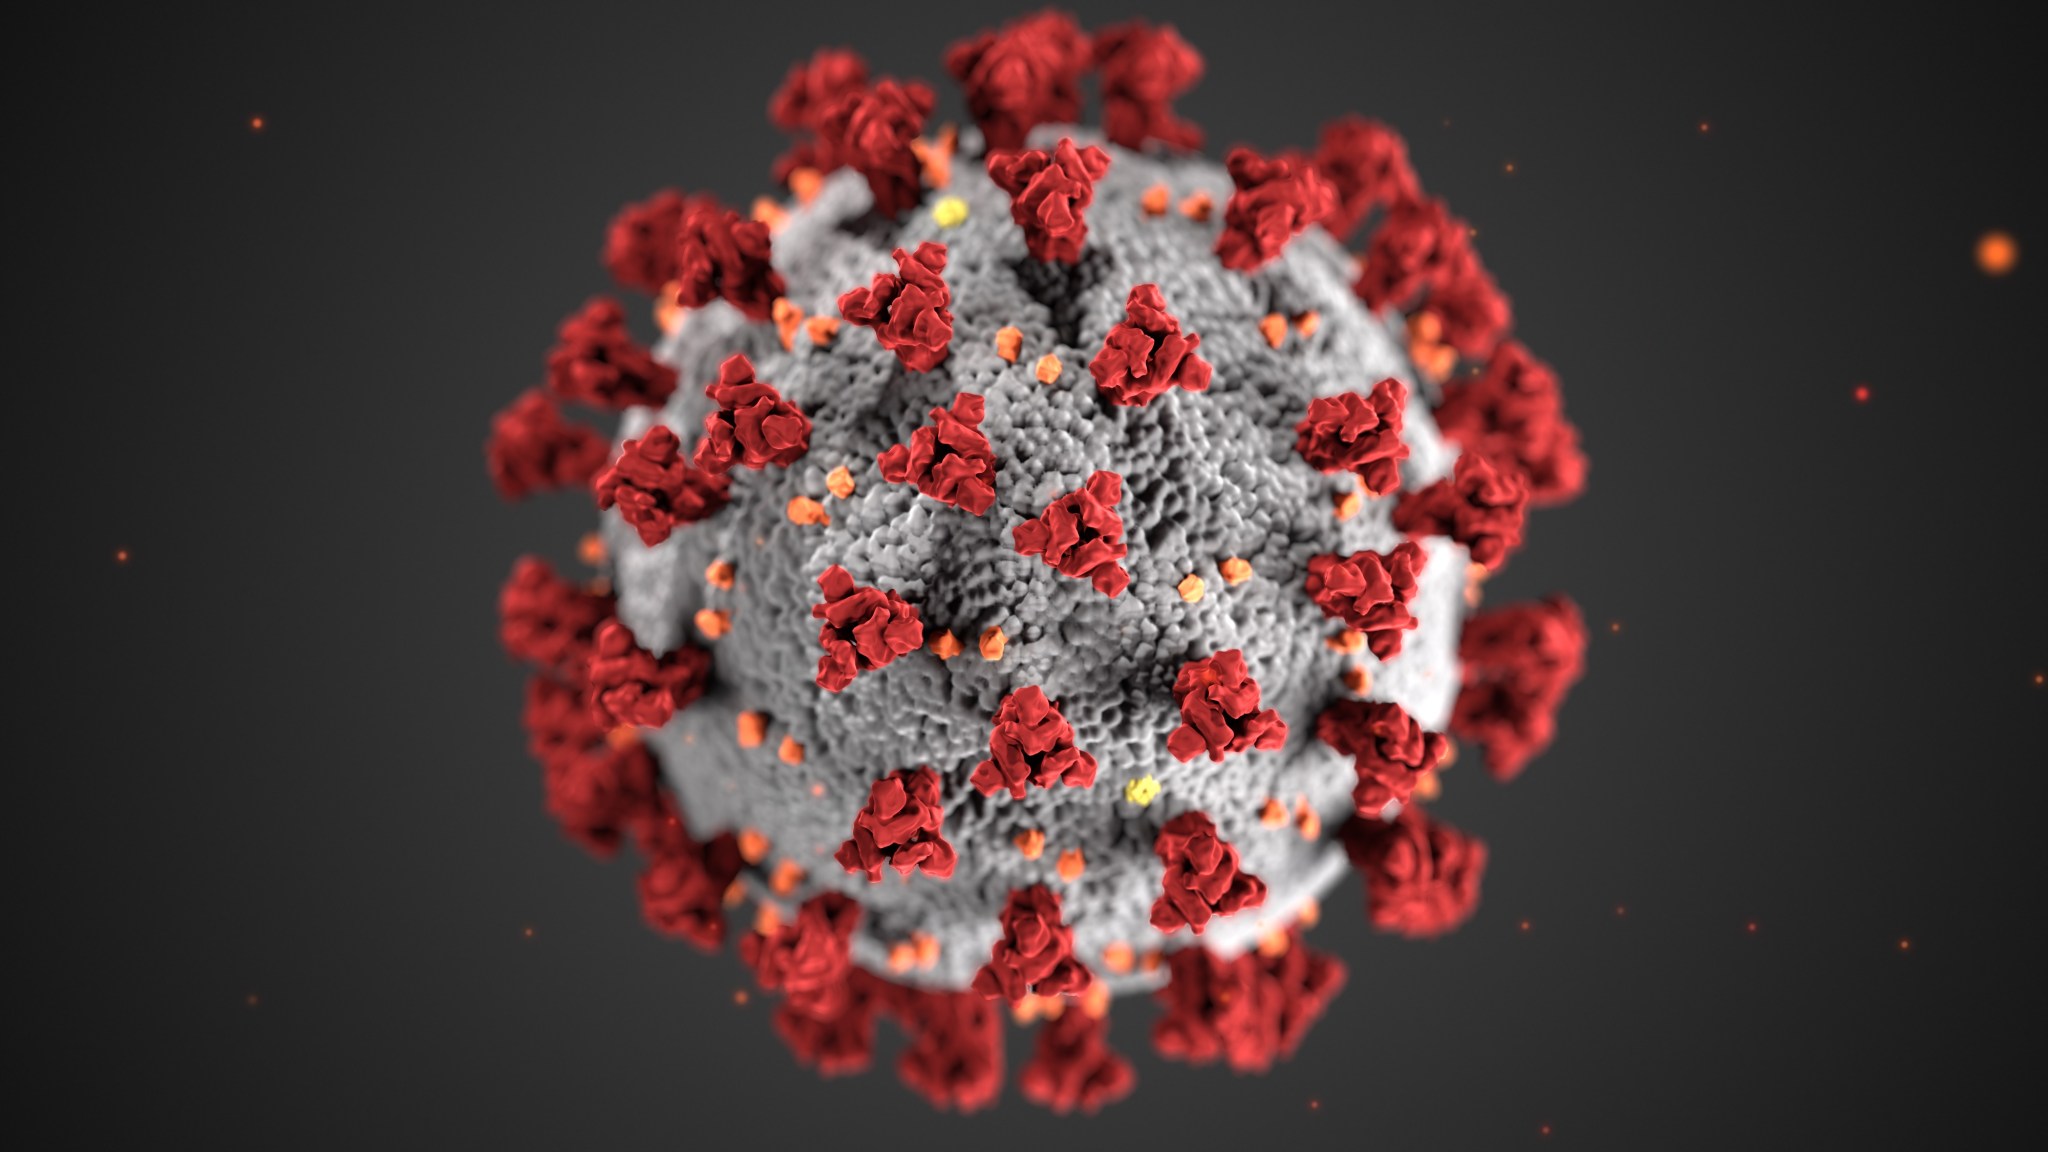 Illustration of the novel coronavirus that shows it is as a spherical gray ball with protruding red spike proteins.